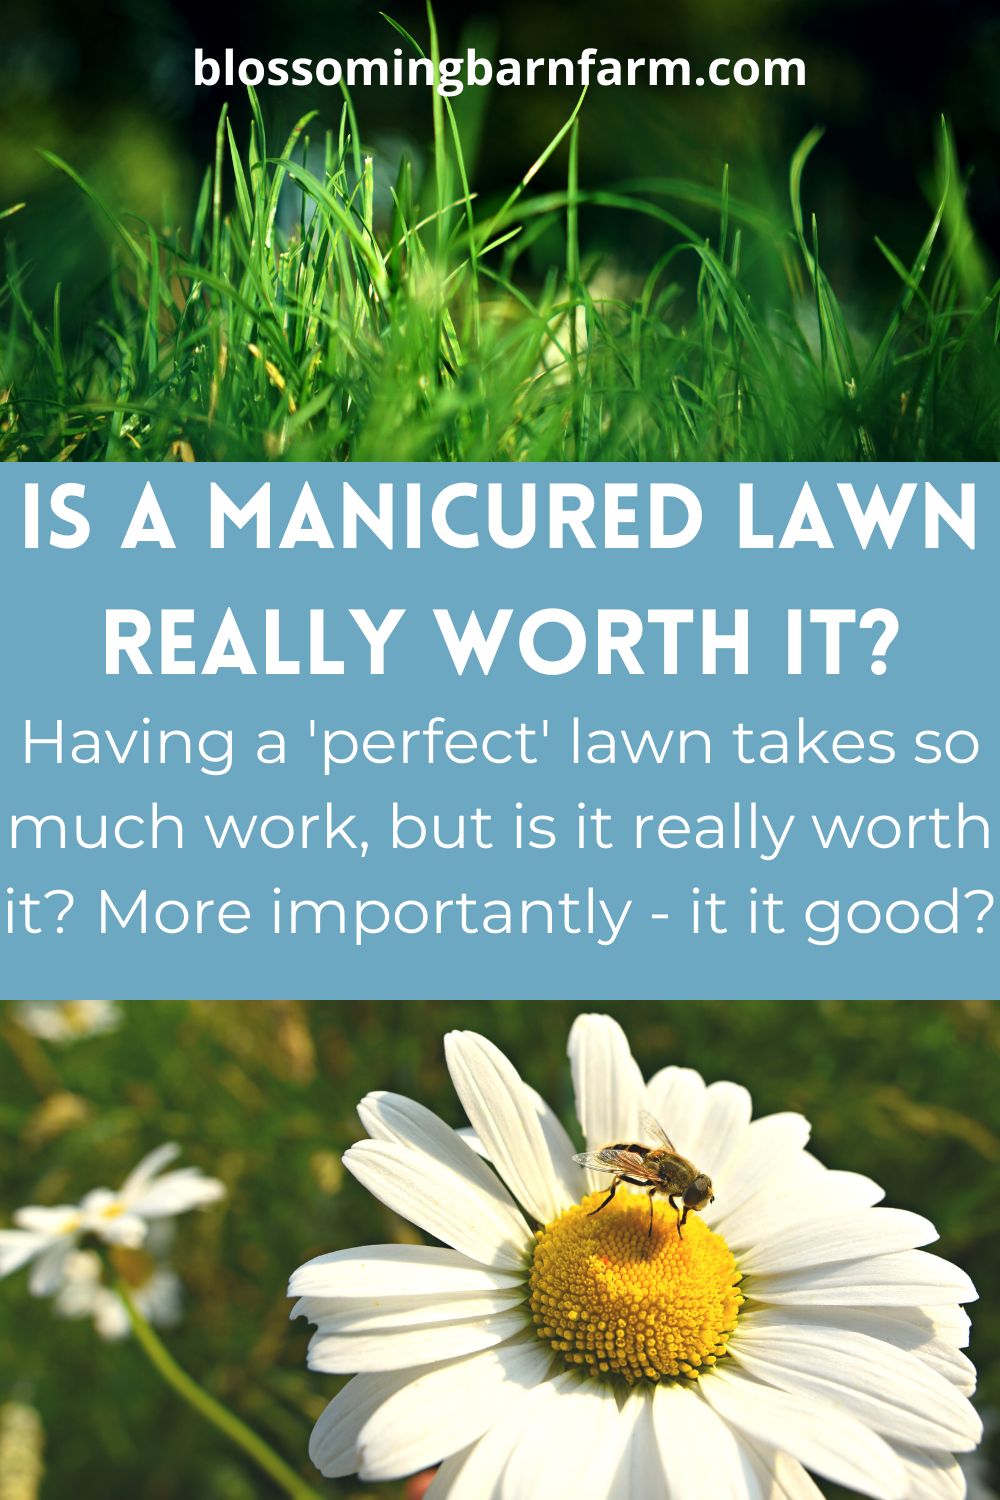 Help save the bees by getting rid of your turf grass lawn. Is a manicured lawn really worth it. Bee on daisy, below green grass.